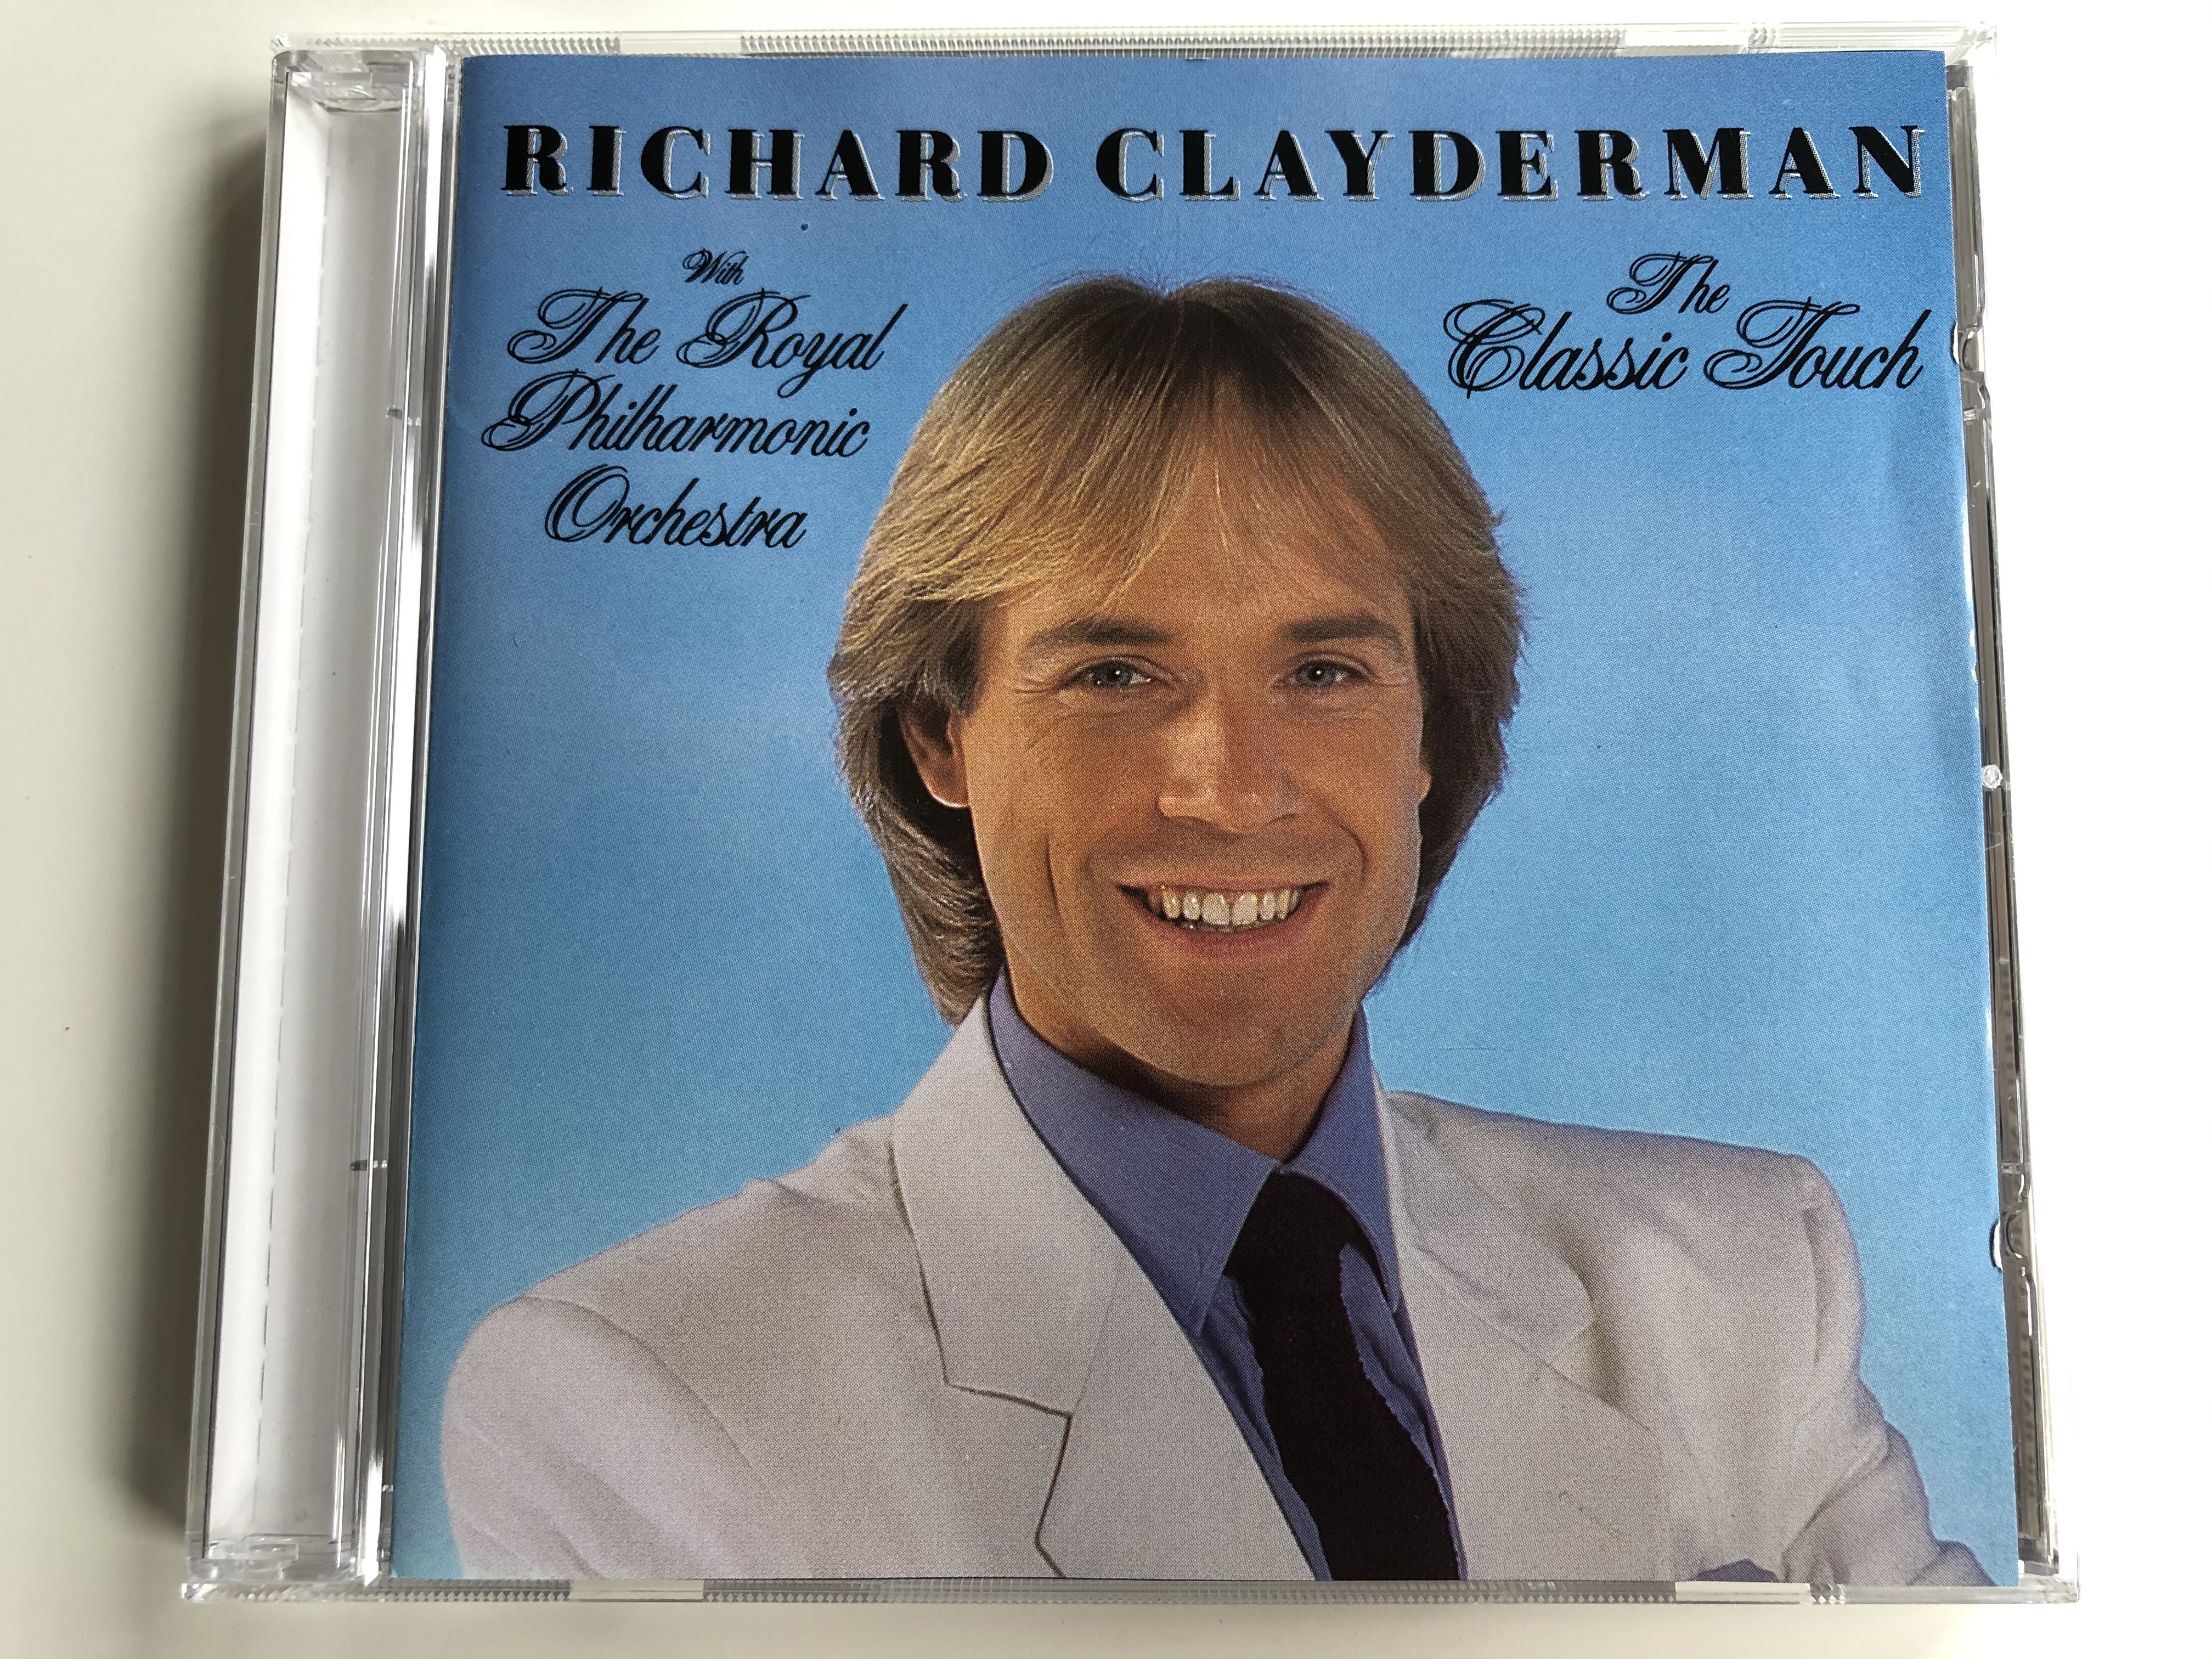 richard-clayderman-the-classic-touch-the-royal-philharmonic-orchestra-delphine-records-audio-cd-1985-stereo-820-299-2-1-.jpg